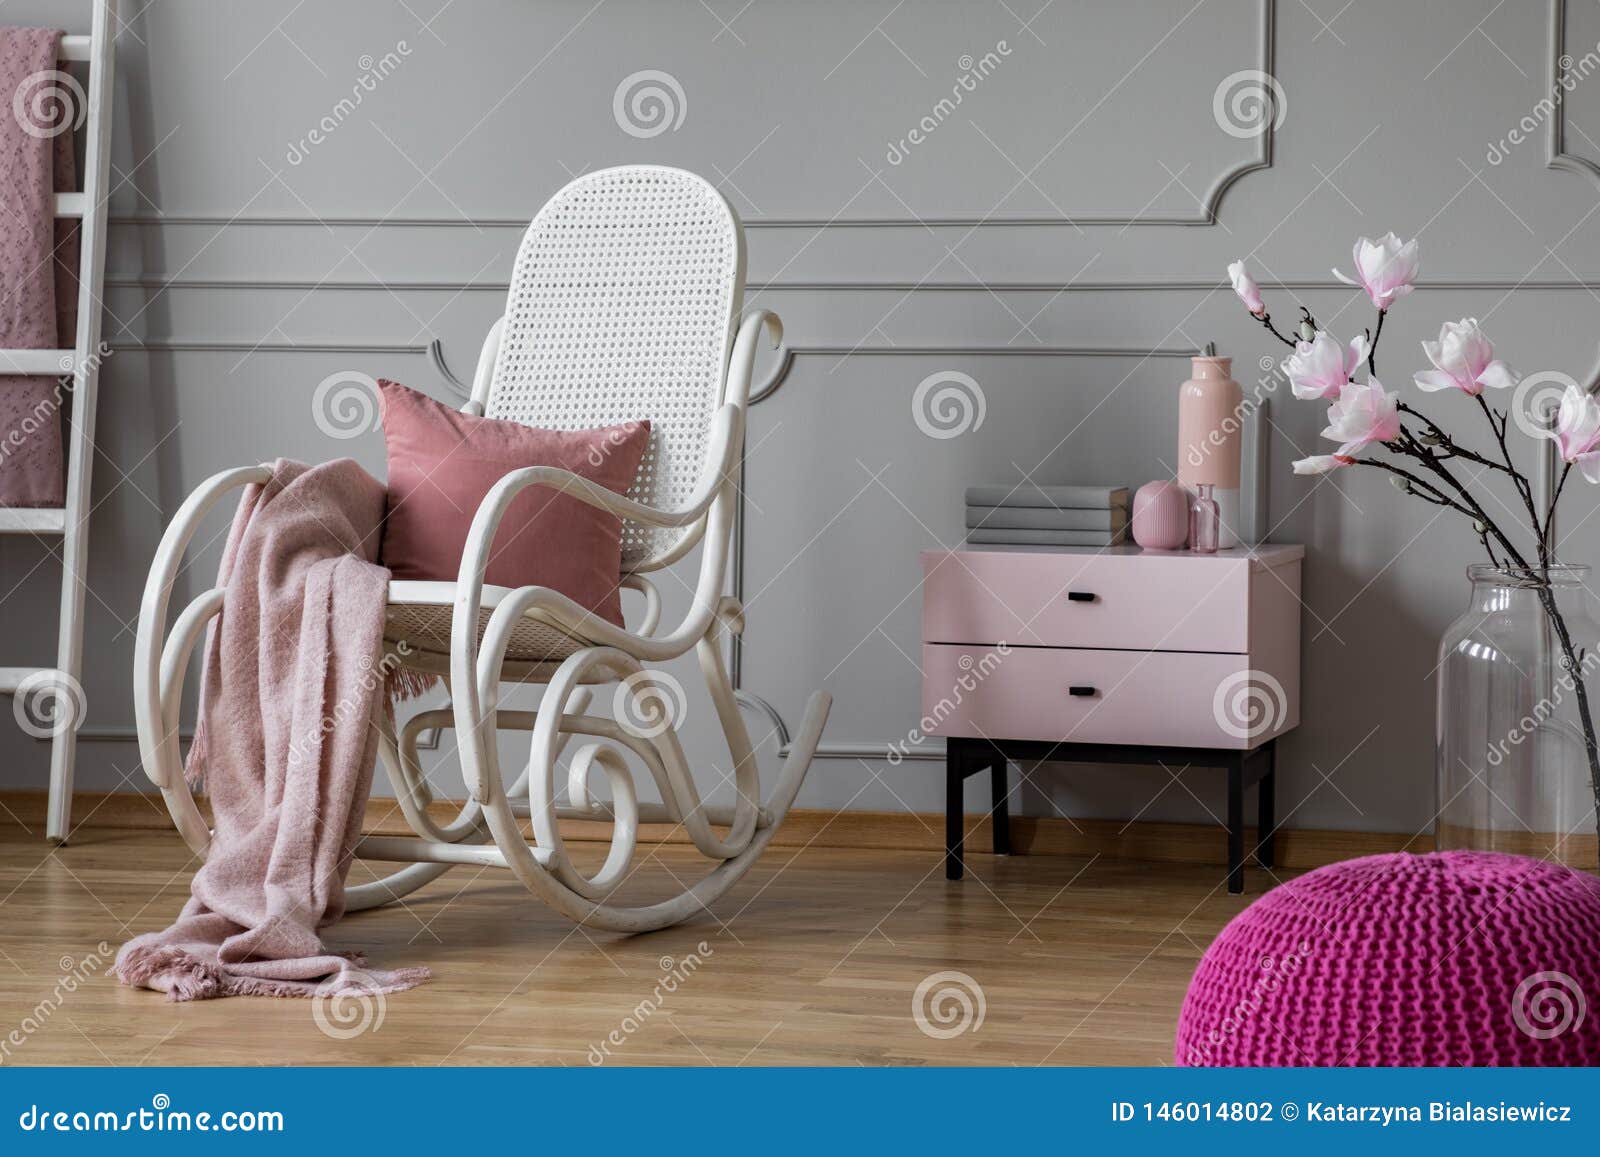 pastel pink blanket and pillow on white rocking chair in sophisticated room with nightstand and flowers in glass vase, copy space